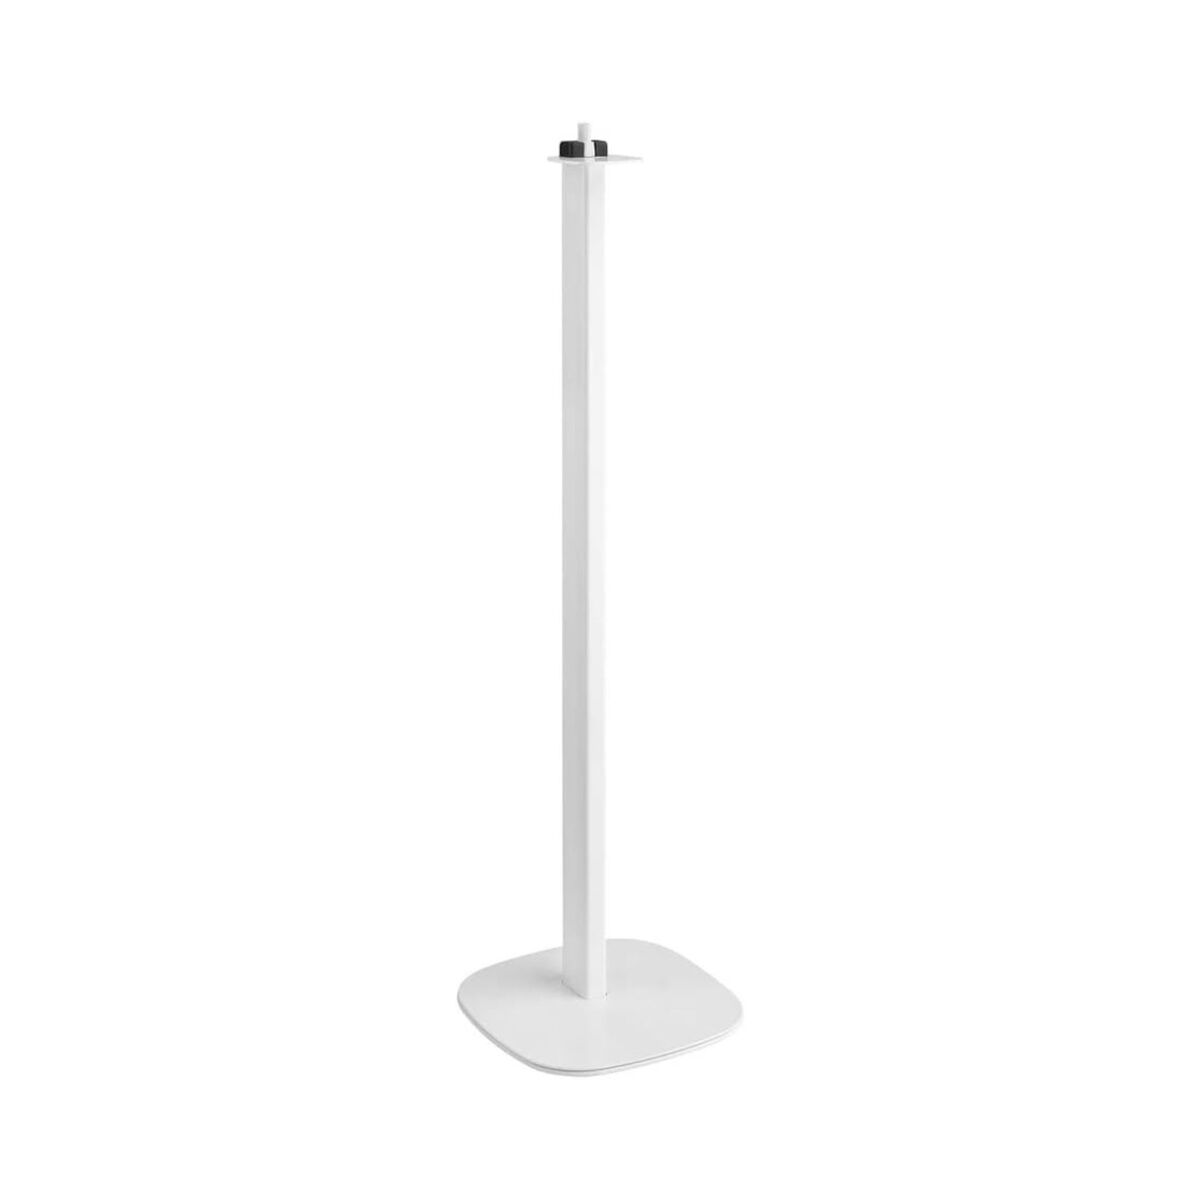 Speaker Stand Cavus FLOOR STAND, Cavus, Electronics, Audio and Hi-Fi equipment, speaker-stand-cavus-floor-stand, Brand_Cavus, category-reference-2609, category-reference-2637, category-reference-2882, category-reference-t-19653, category-reference-t-19899, category-reference-t-21329, category-reference-t-25554, category-reference-t-7441, cinema and television, Condition_NEW, music, Price_100 - 200, RiotNook